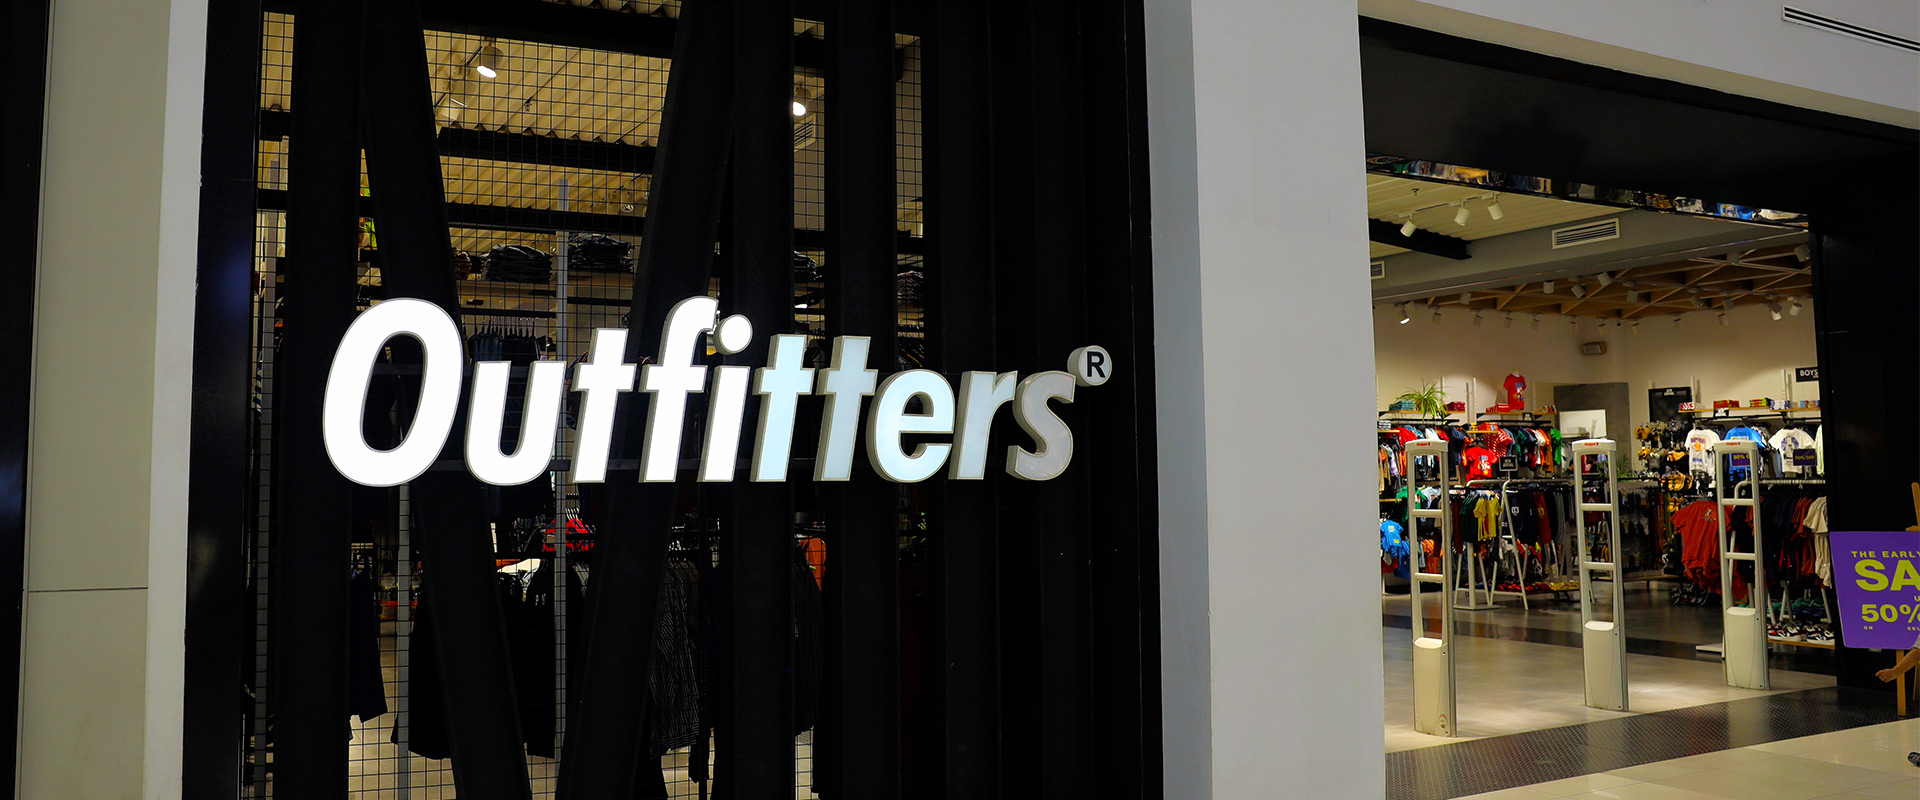 outfitters-1